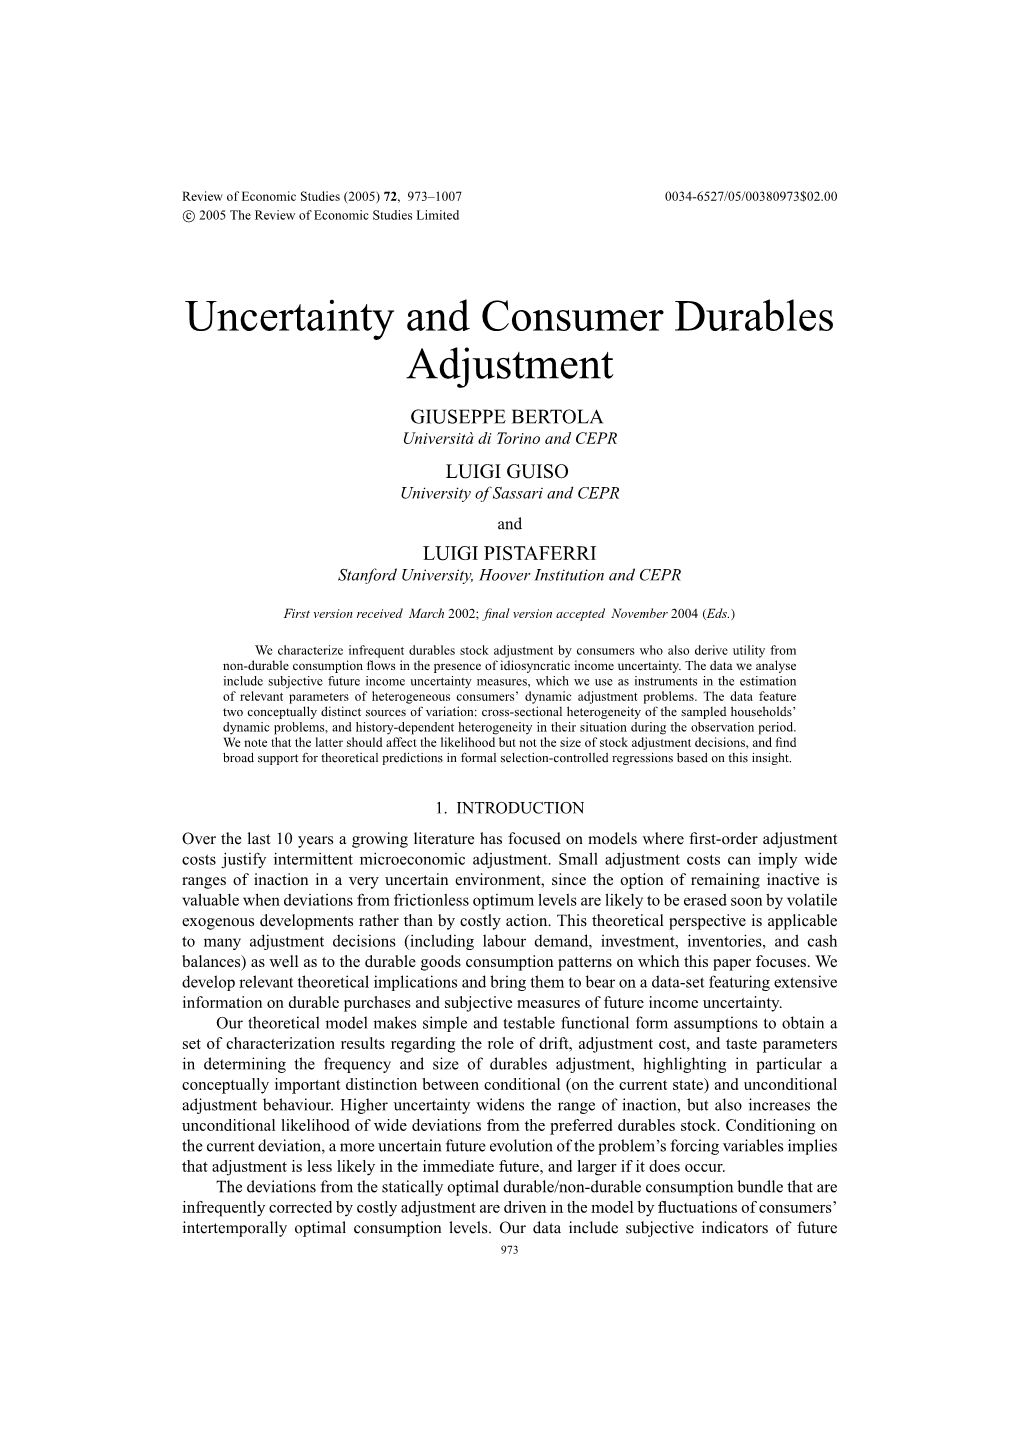 Uncertainty and Consumer Durables Adjustment